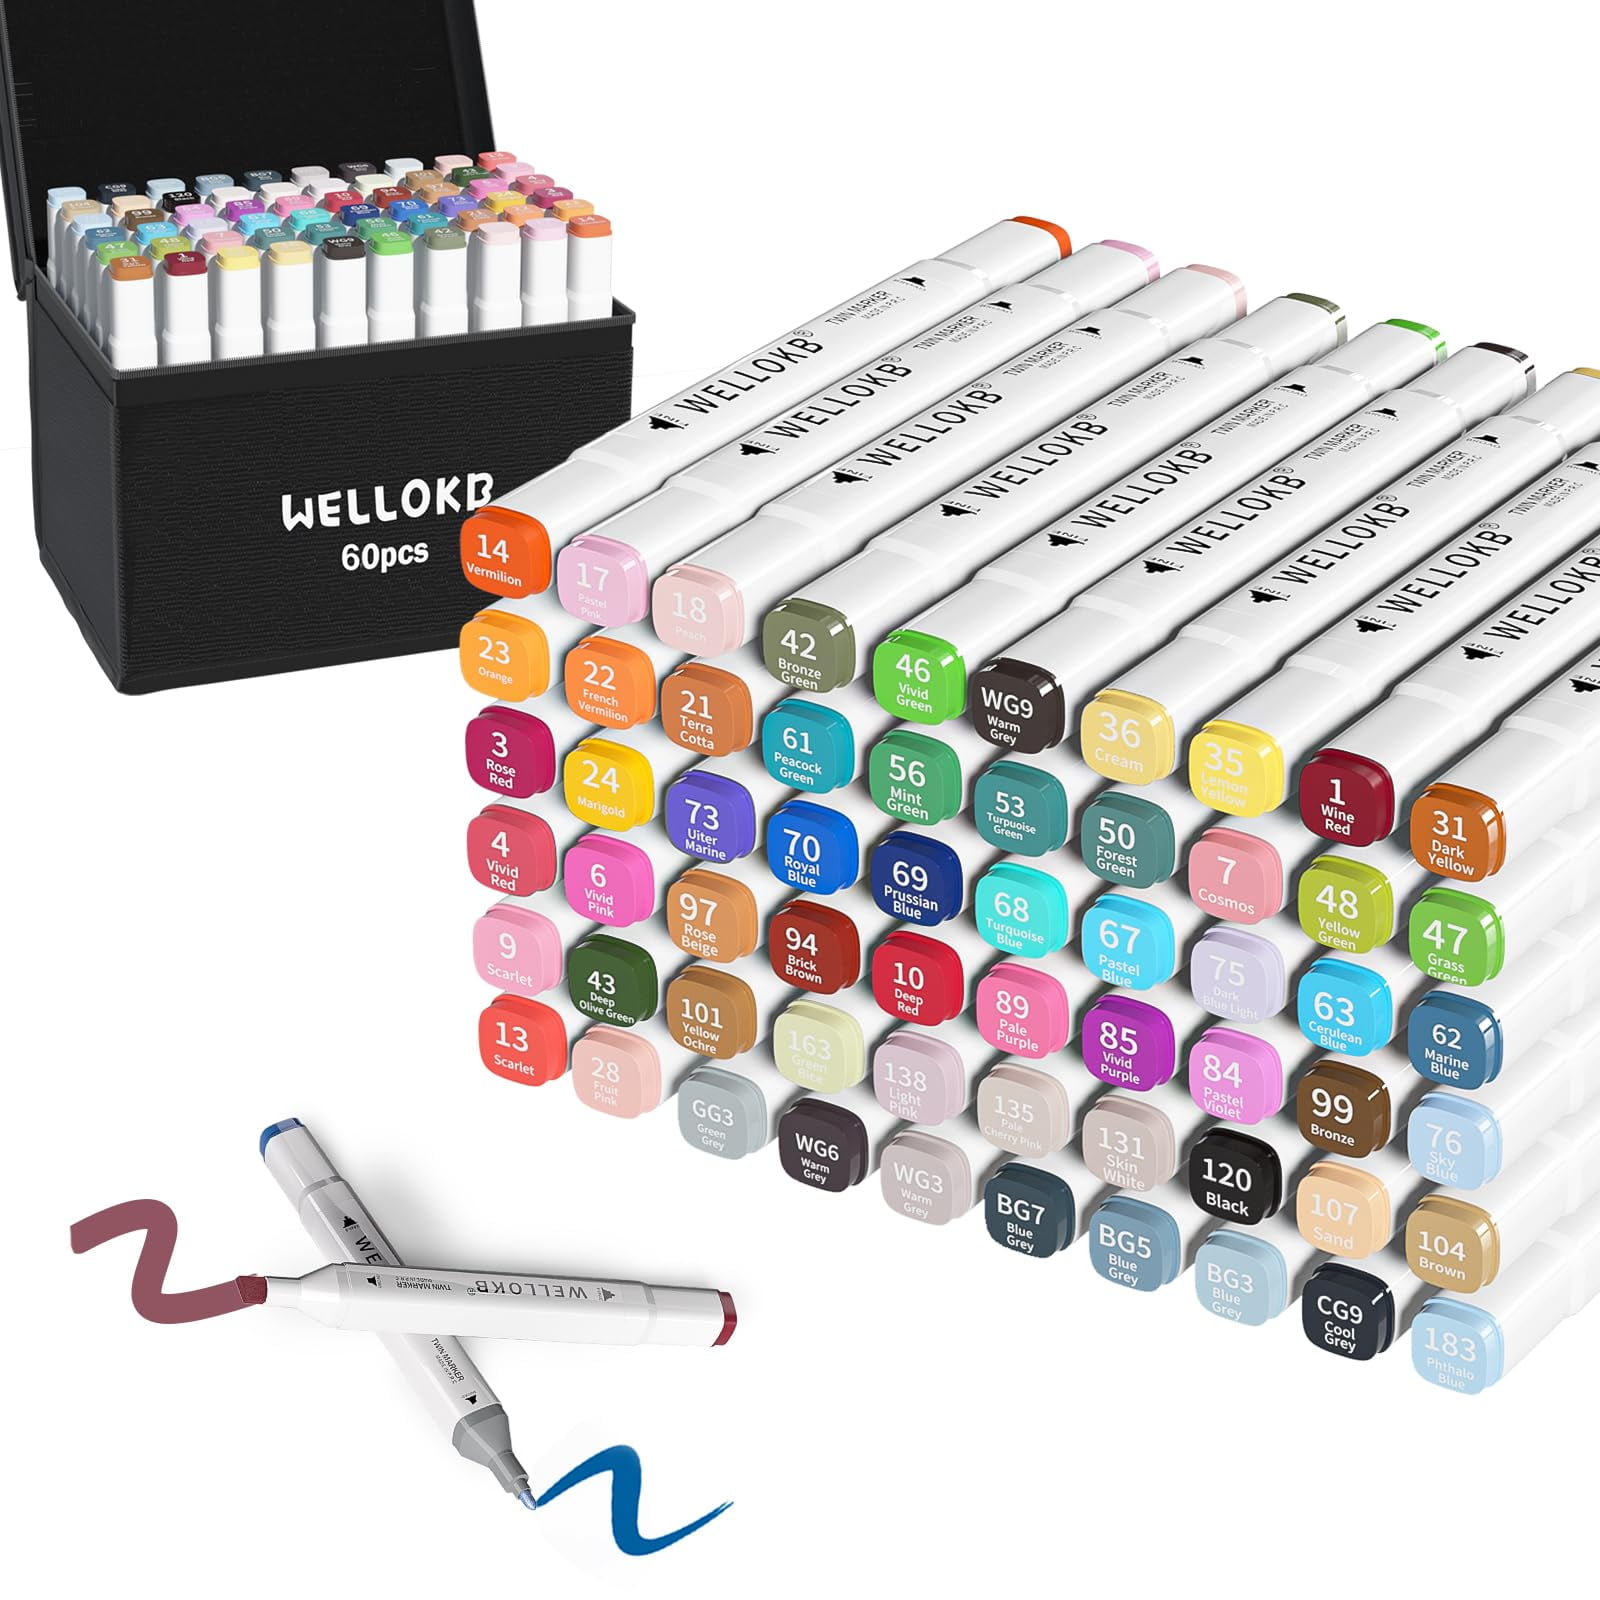 Bianyo Professional Series Alcohol-Based Dual Tip Brush Markers Set of 72